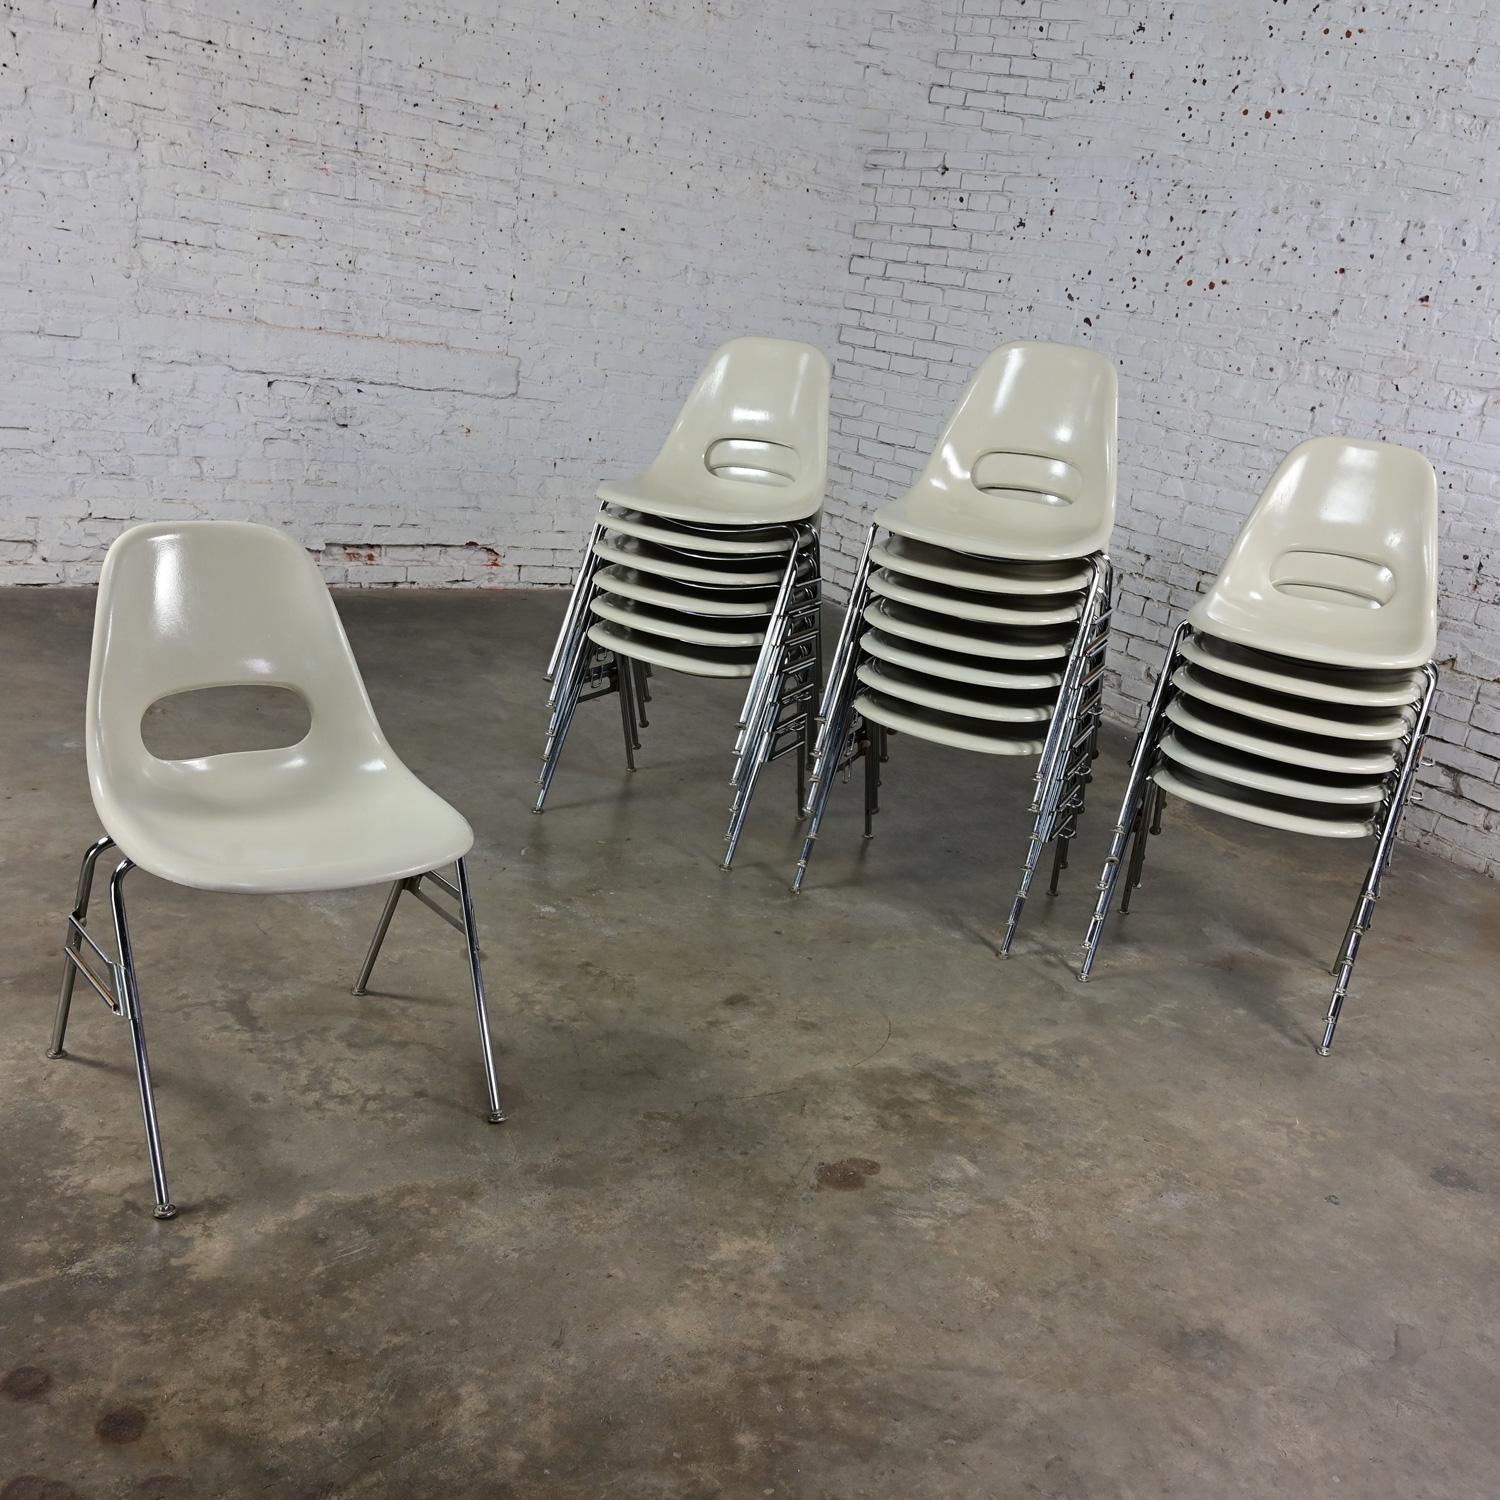 Handsome vintage Mid-Century Modern Krueger International white molded fiberglass shells & chrome tube base stacking chairs. 8 available, 8 with side connecters, selling separately. Priced per chair. Beautiful condition, keeping in mind that this is